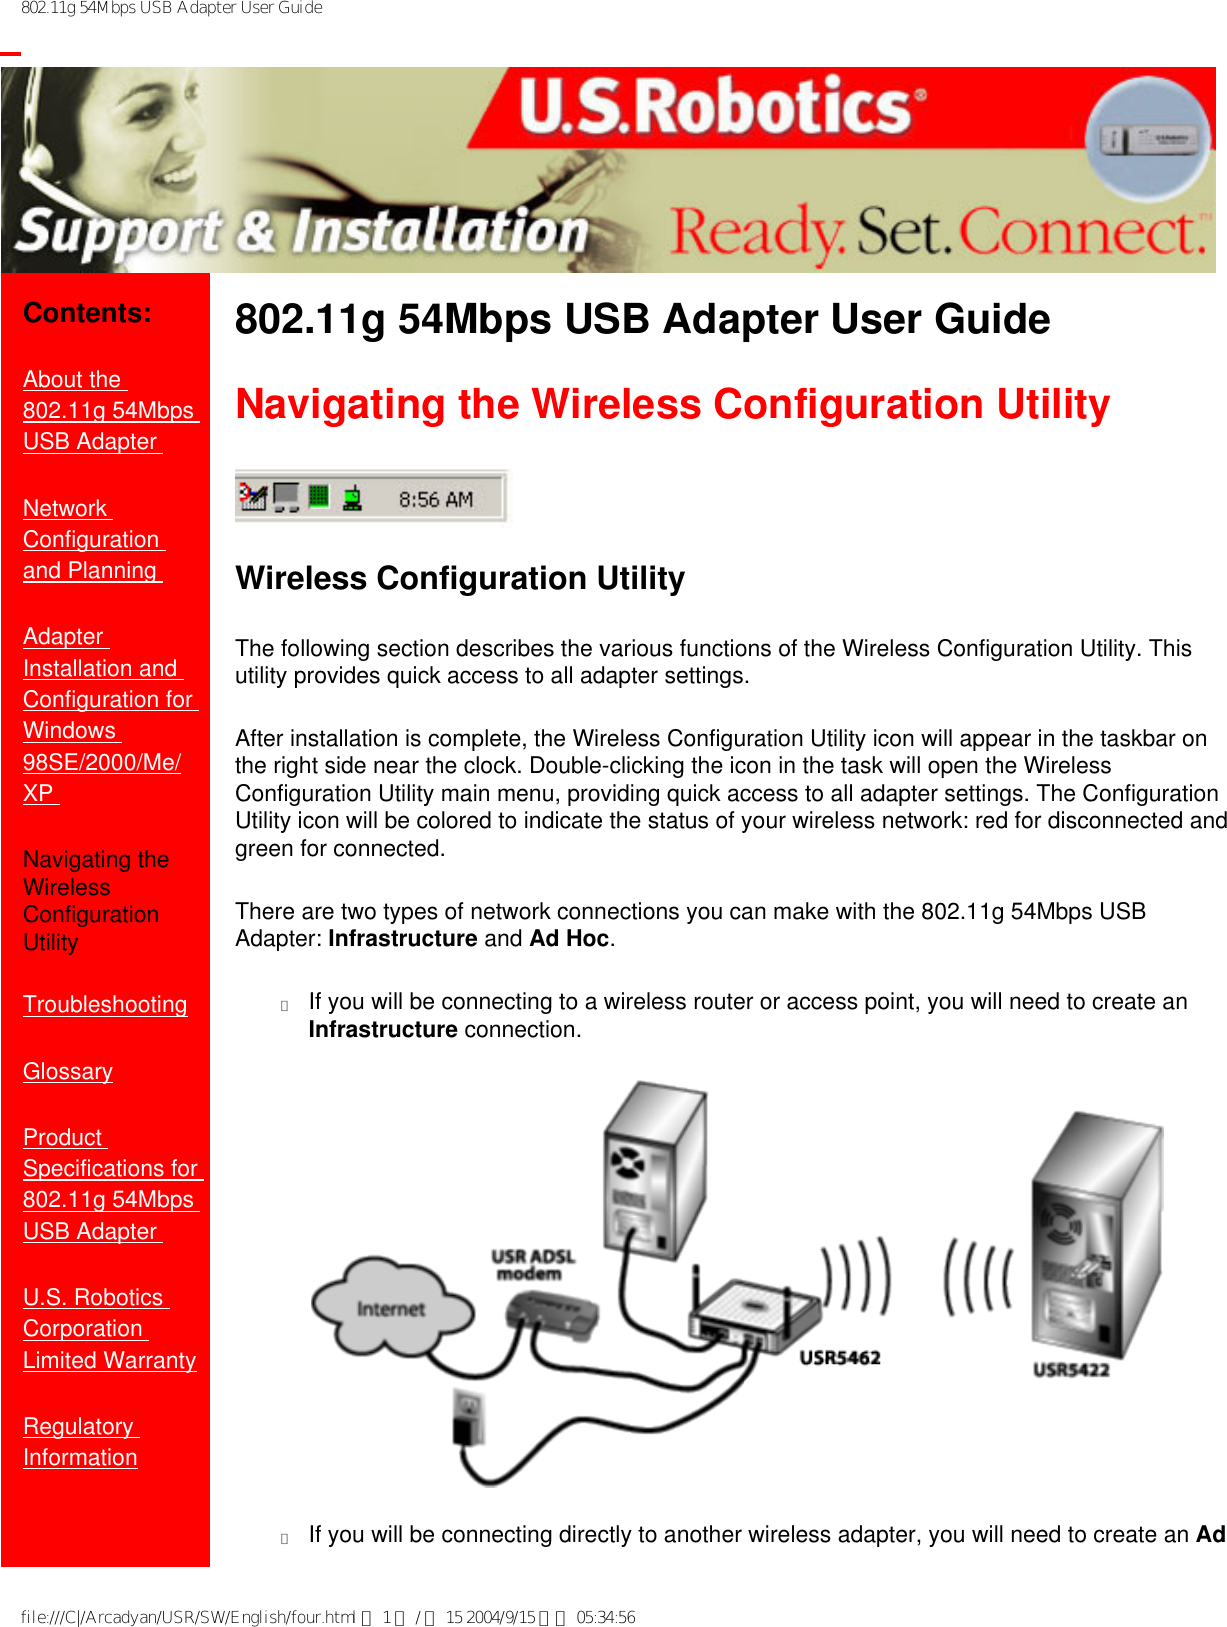 802.11g 54Mbps USB Adapter User Guide           Contents:About the 802.11g 54Mbps USB Adapter Network Configuration and Planning Adapter Installation and Configuration for Windows 98SE/2000/Me/XP Navigating the Wireless Configuration UtilityTroubleshooting Glossary Product Specifications for 802.11g 54Mbps USB Adapter U.S. Robotics Corporation Limited Warranty Regulatory Information802.11g 54Mbps USB Adapter User Guide Navigating the Wireless Configuration UtilityWireless Configuration UtilityThe following section describes the various functions of the Wireless Configuration Utility. This utility provides quick access to all adapter settings. After installation is complete, the Wireless Configuration Utility icon will appear in the taskbar on the right side near the clock. Double-clicking the icon in the task will open the Wireless Configuration Utility main menu, providing quick access to all adapter settings. The Configuration Utility icon will be colored to indicate the status of your wireless network: red for disconnected and green for connected. There are two types of network connections you can make with the 802.11g 54Mbps USB Adapter: Infrastructure and Ad Hoc. ●     If you will be connecting to a wireless router or access point, you will need to create an Infrastructure connection. ●     If you will be connecting directly to another wireless adapter, you will need to create an Ad file:///C|/Arcadyan/USR/SW/English/four.html 第 1 頁 / 共 15 2004/9/15 下午 05:34:56